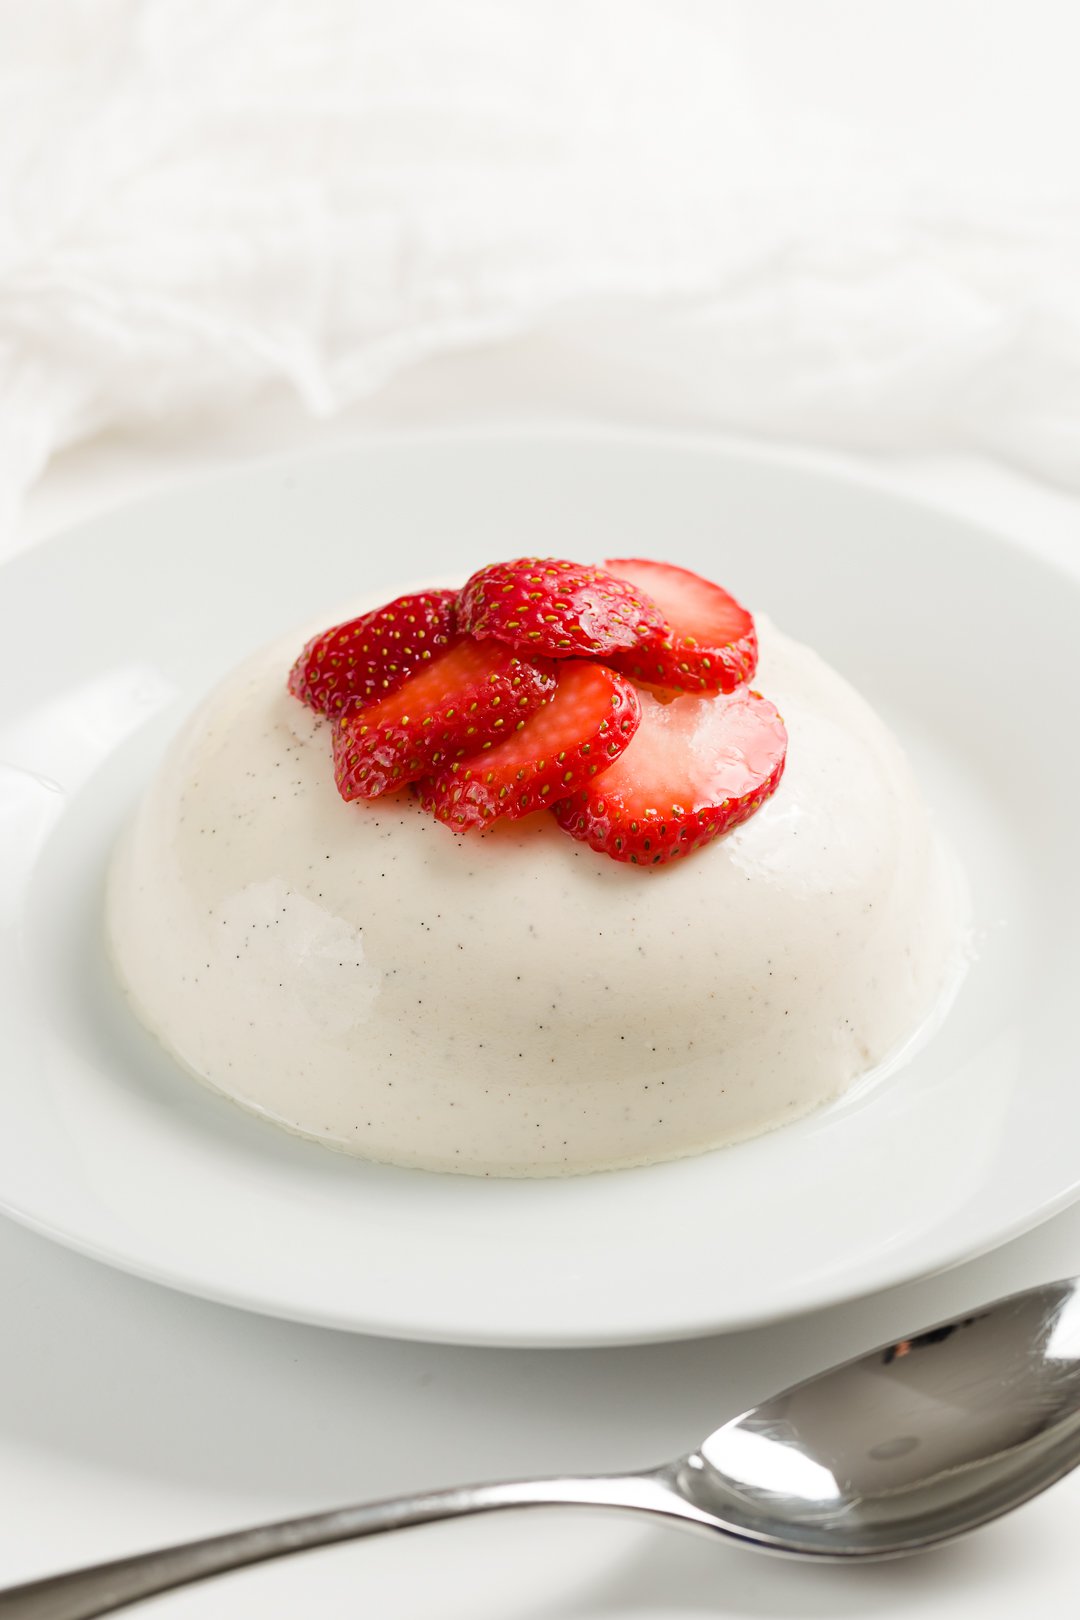 panna cotta on a plate served with macerated strawberries